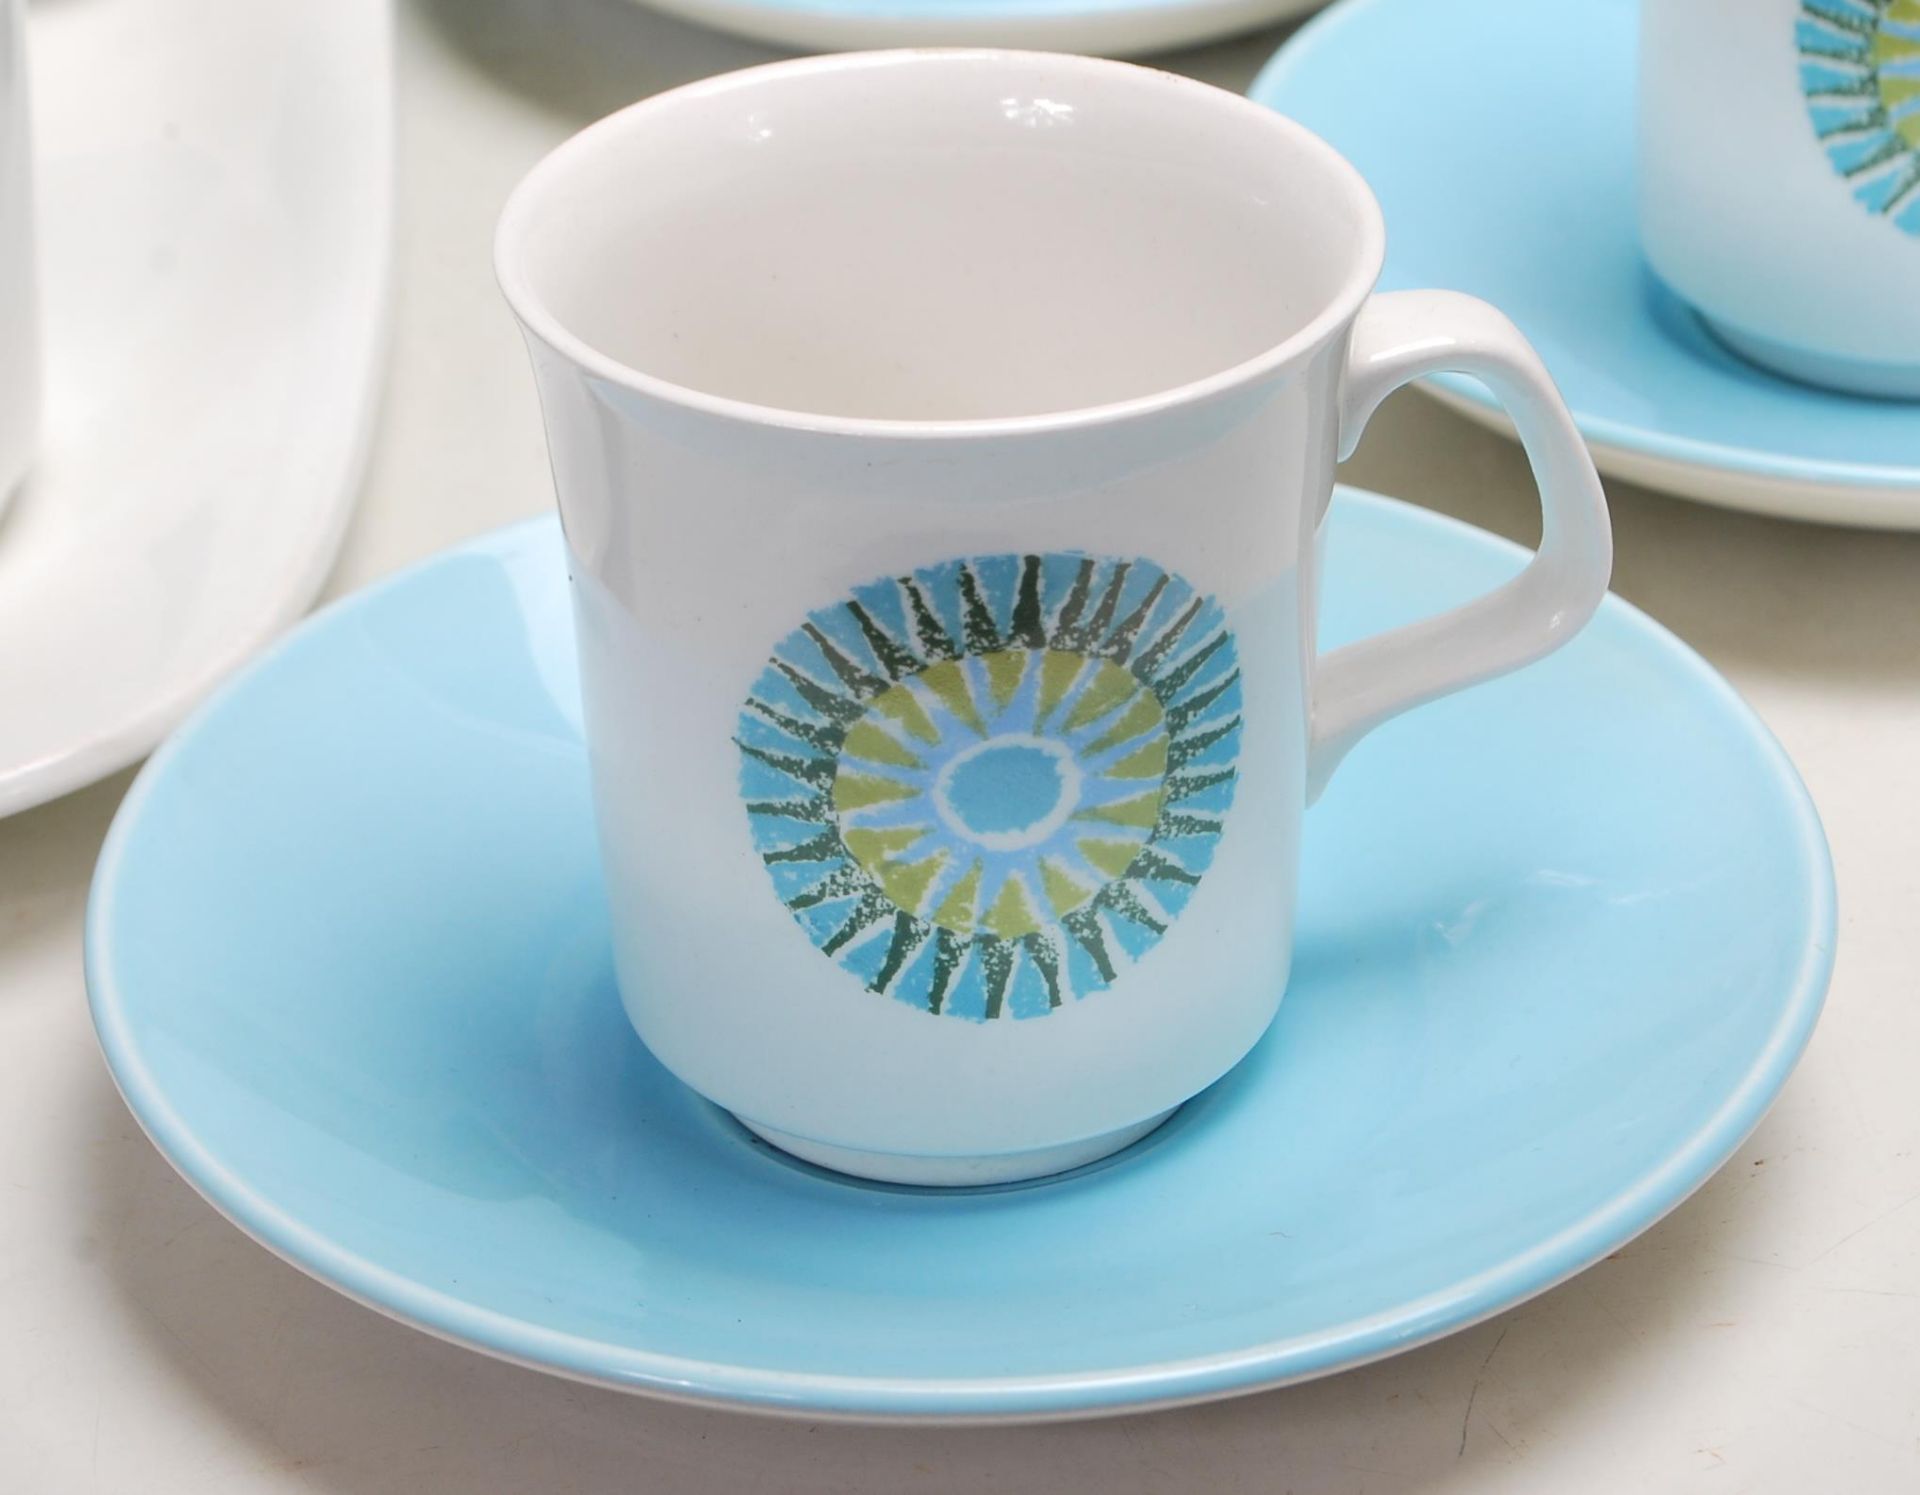 RETRO VINTAGE LATE 20TH CENTURY DINNER SERVICE BY MIDWINTER AND JG MEAKIN STUDIO. - Image 5 of 14